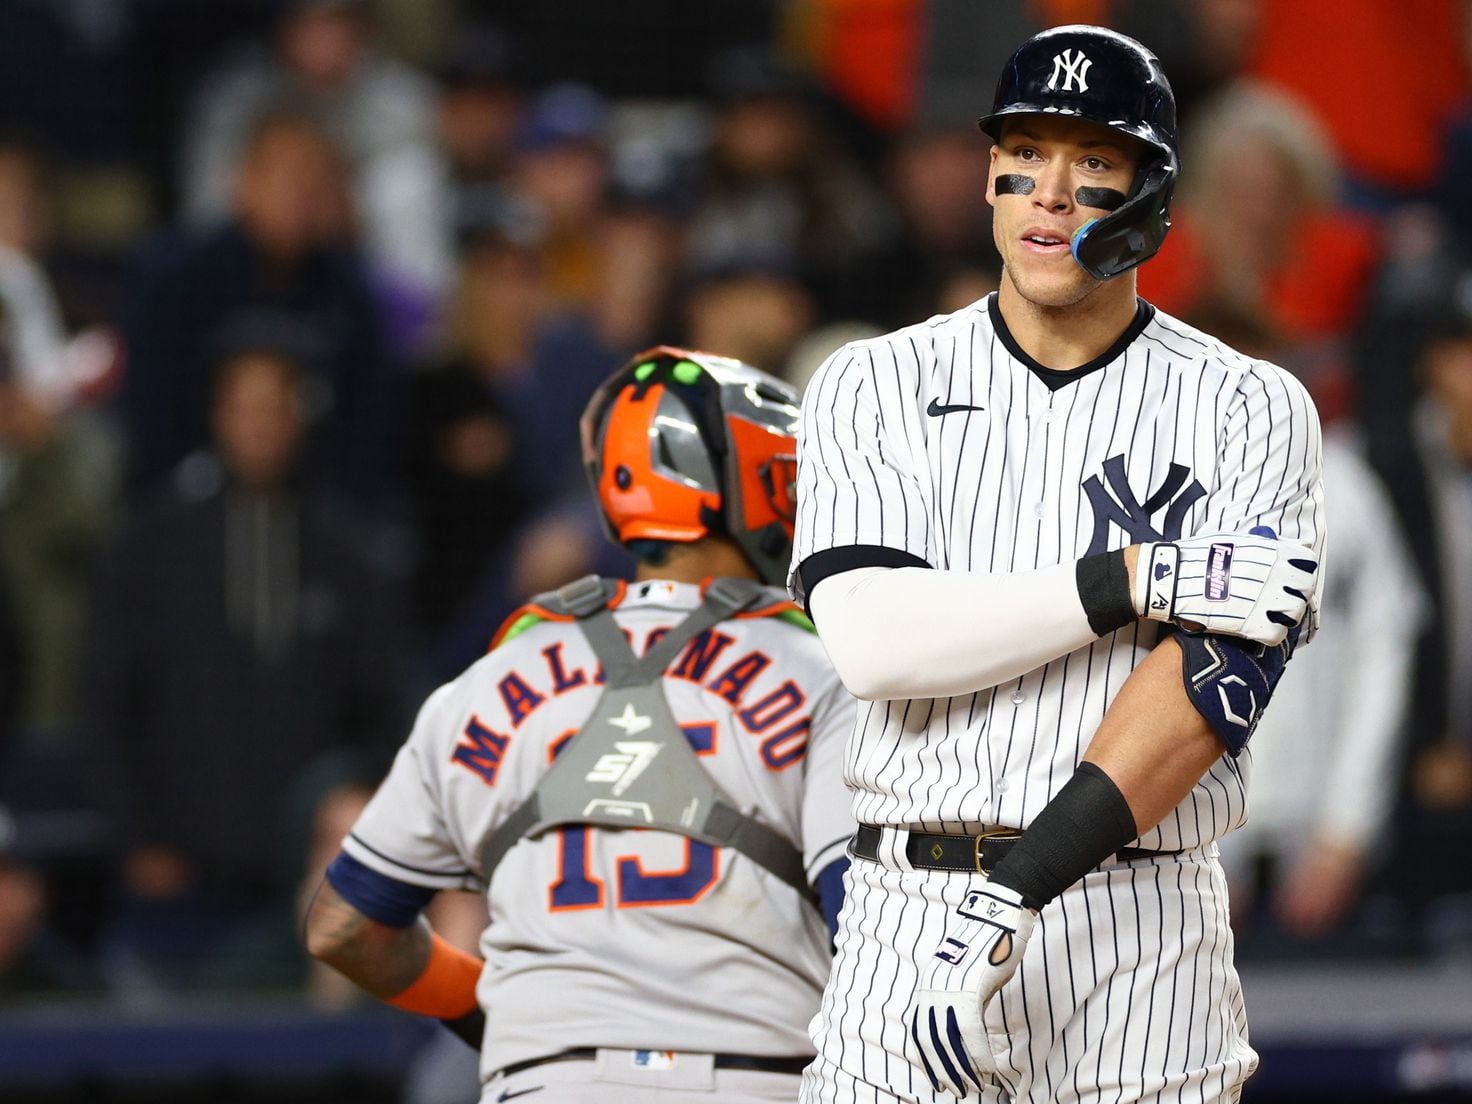 2-0 New York Giants, Mets Clinch Playoffs, Aaron Judge Chases